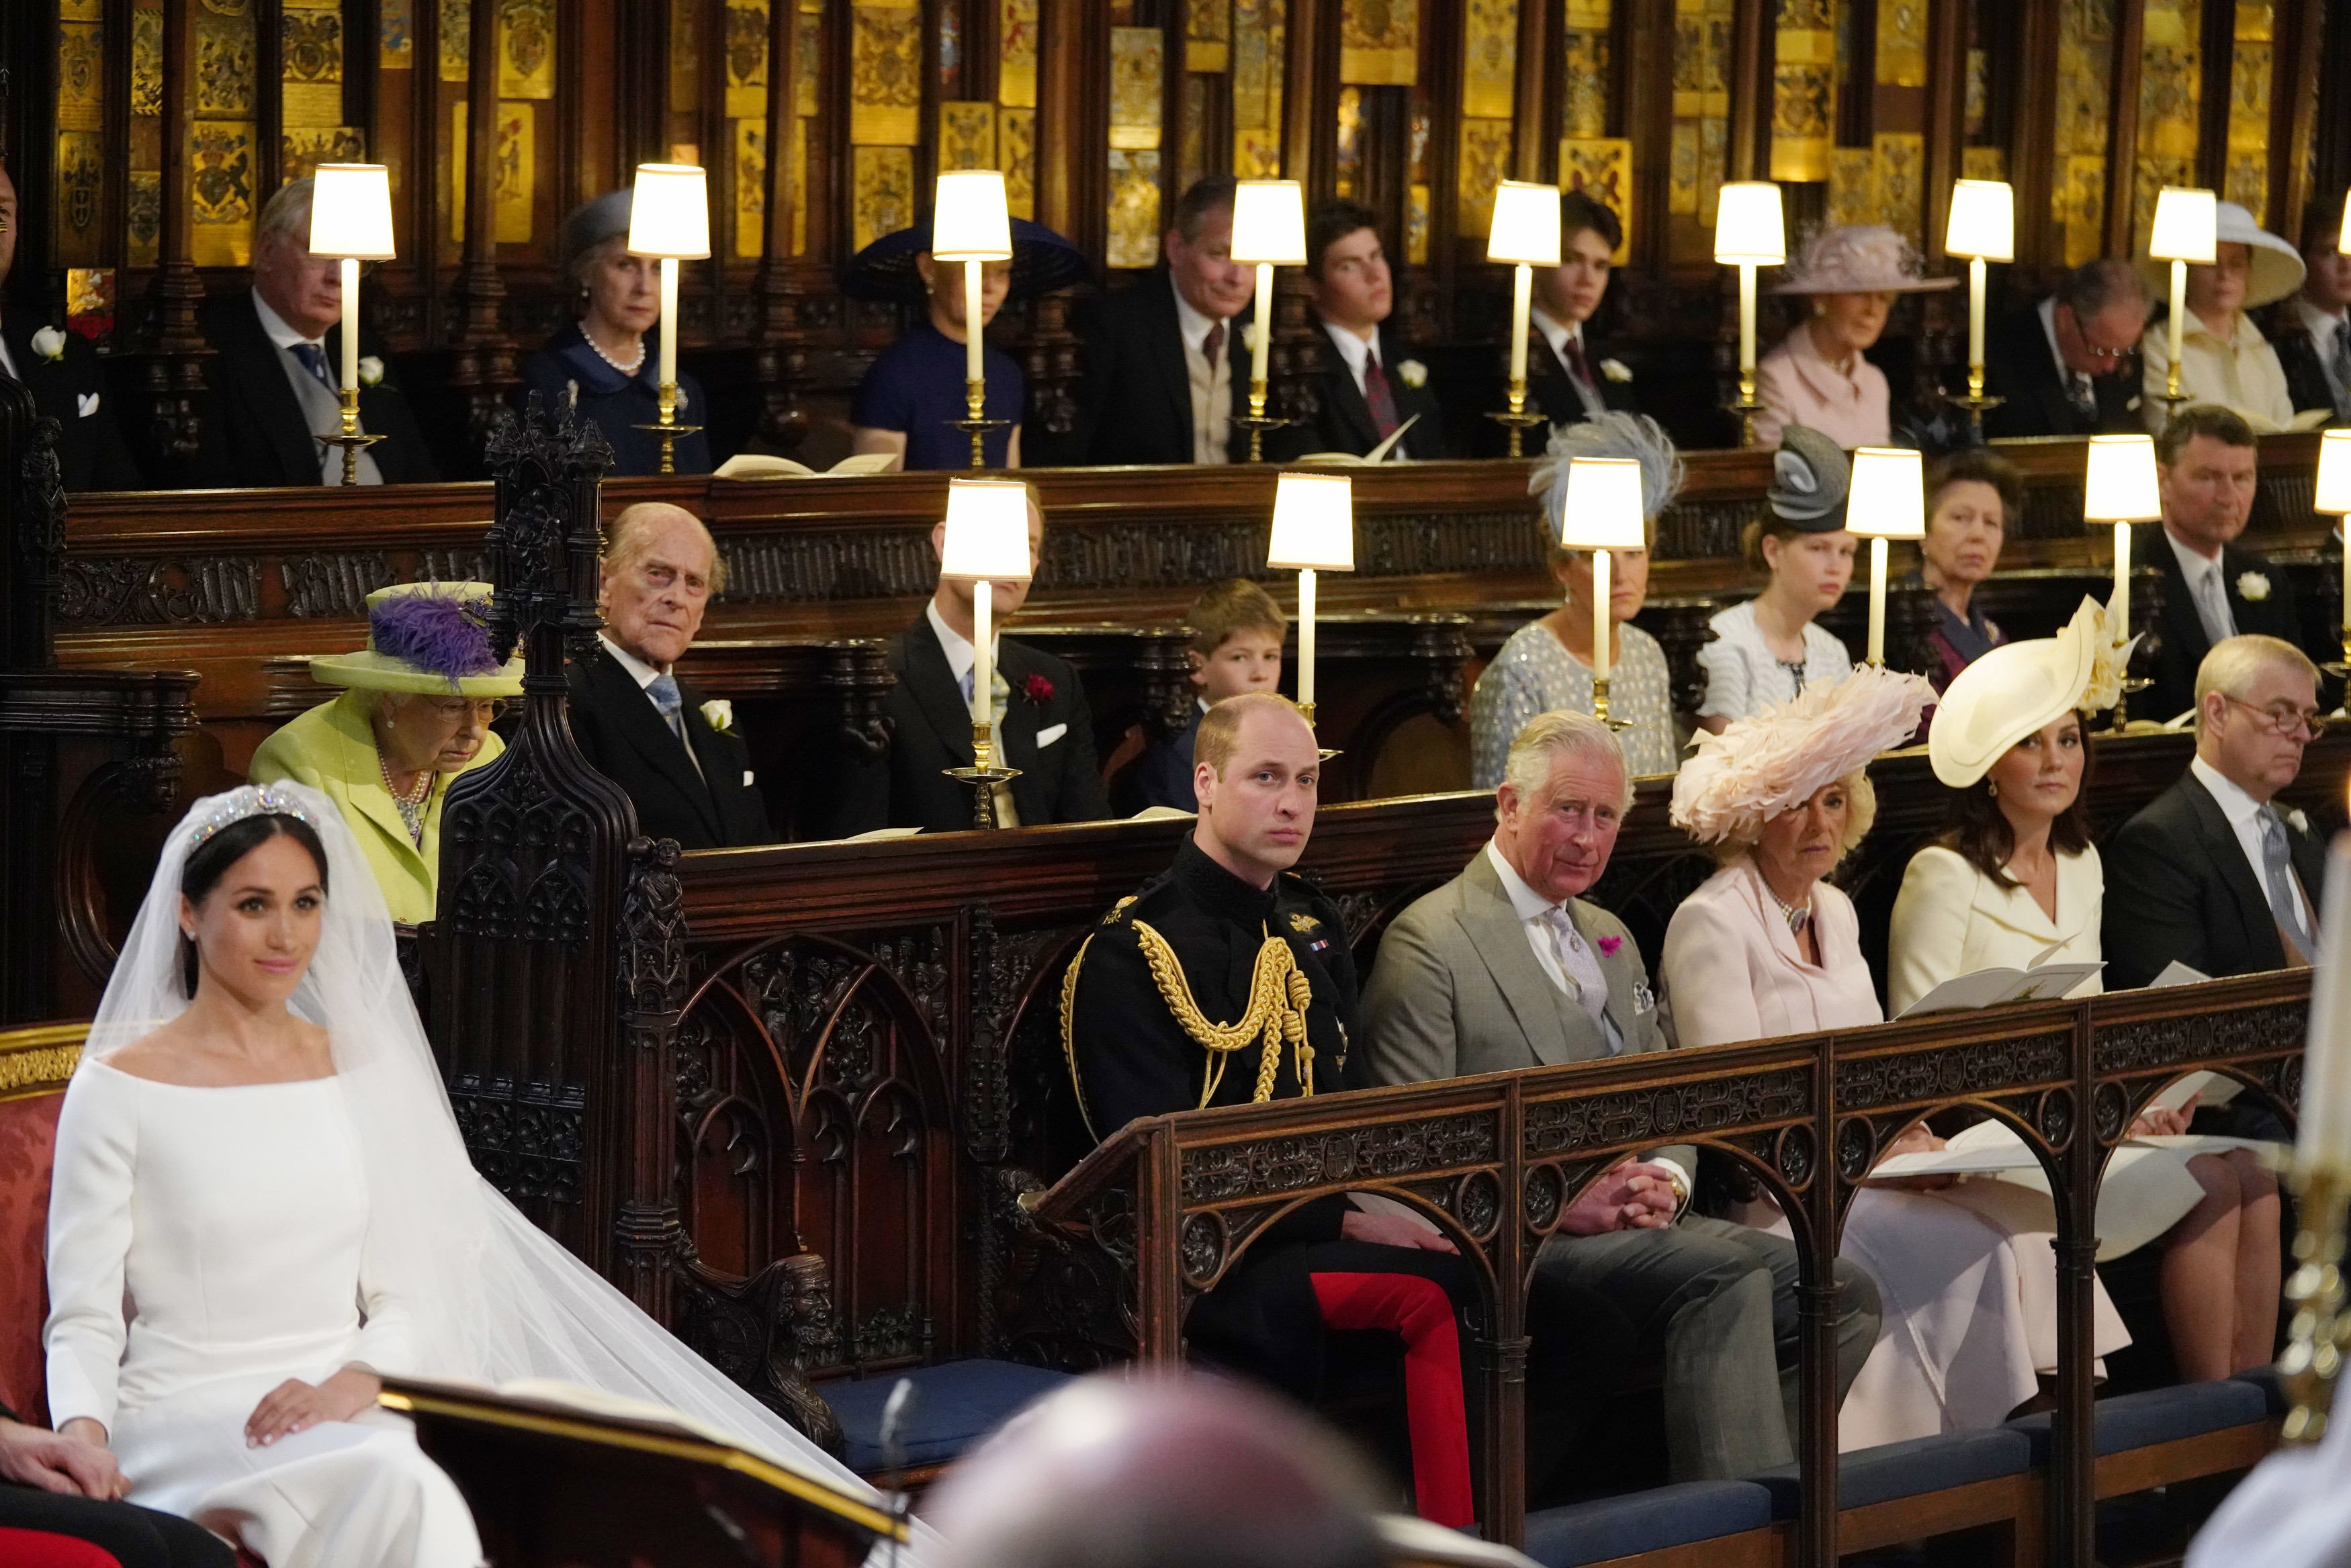 Meghan Markle seated near the royal family in St George’s Chapel for her wedding to Prince Harry